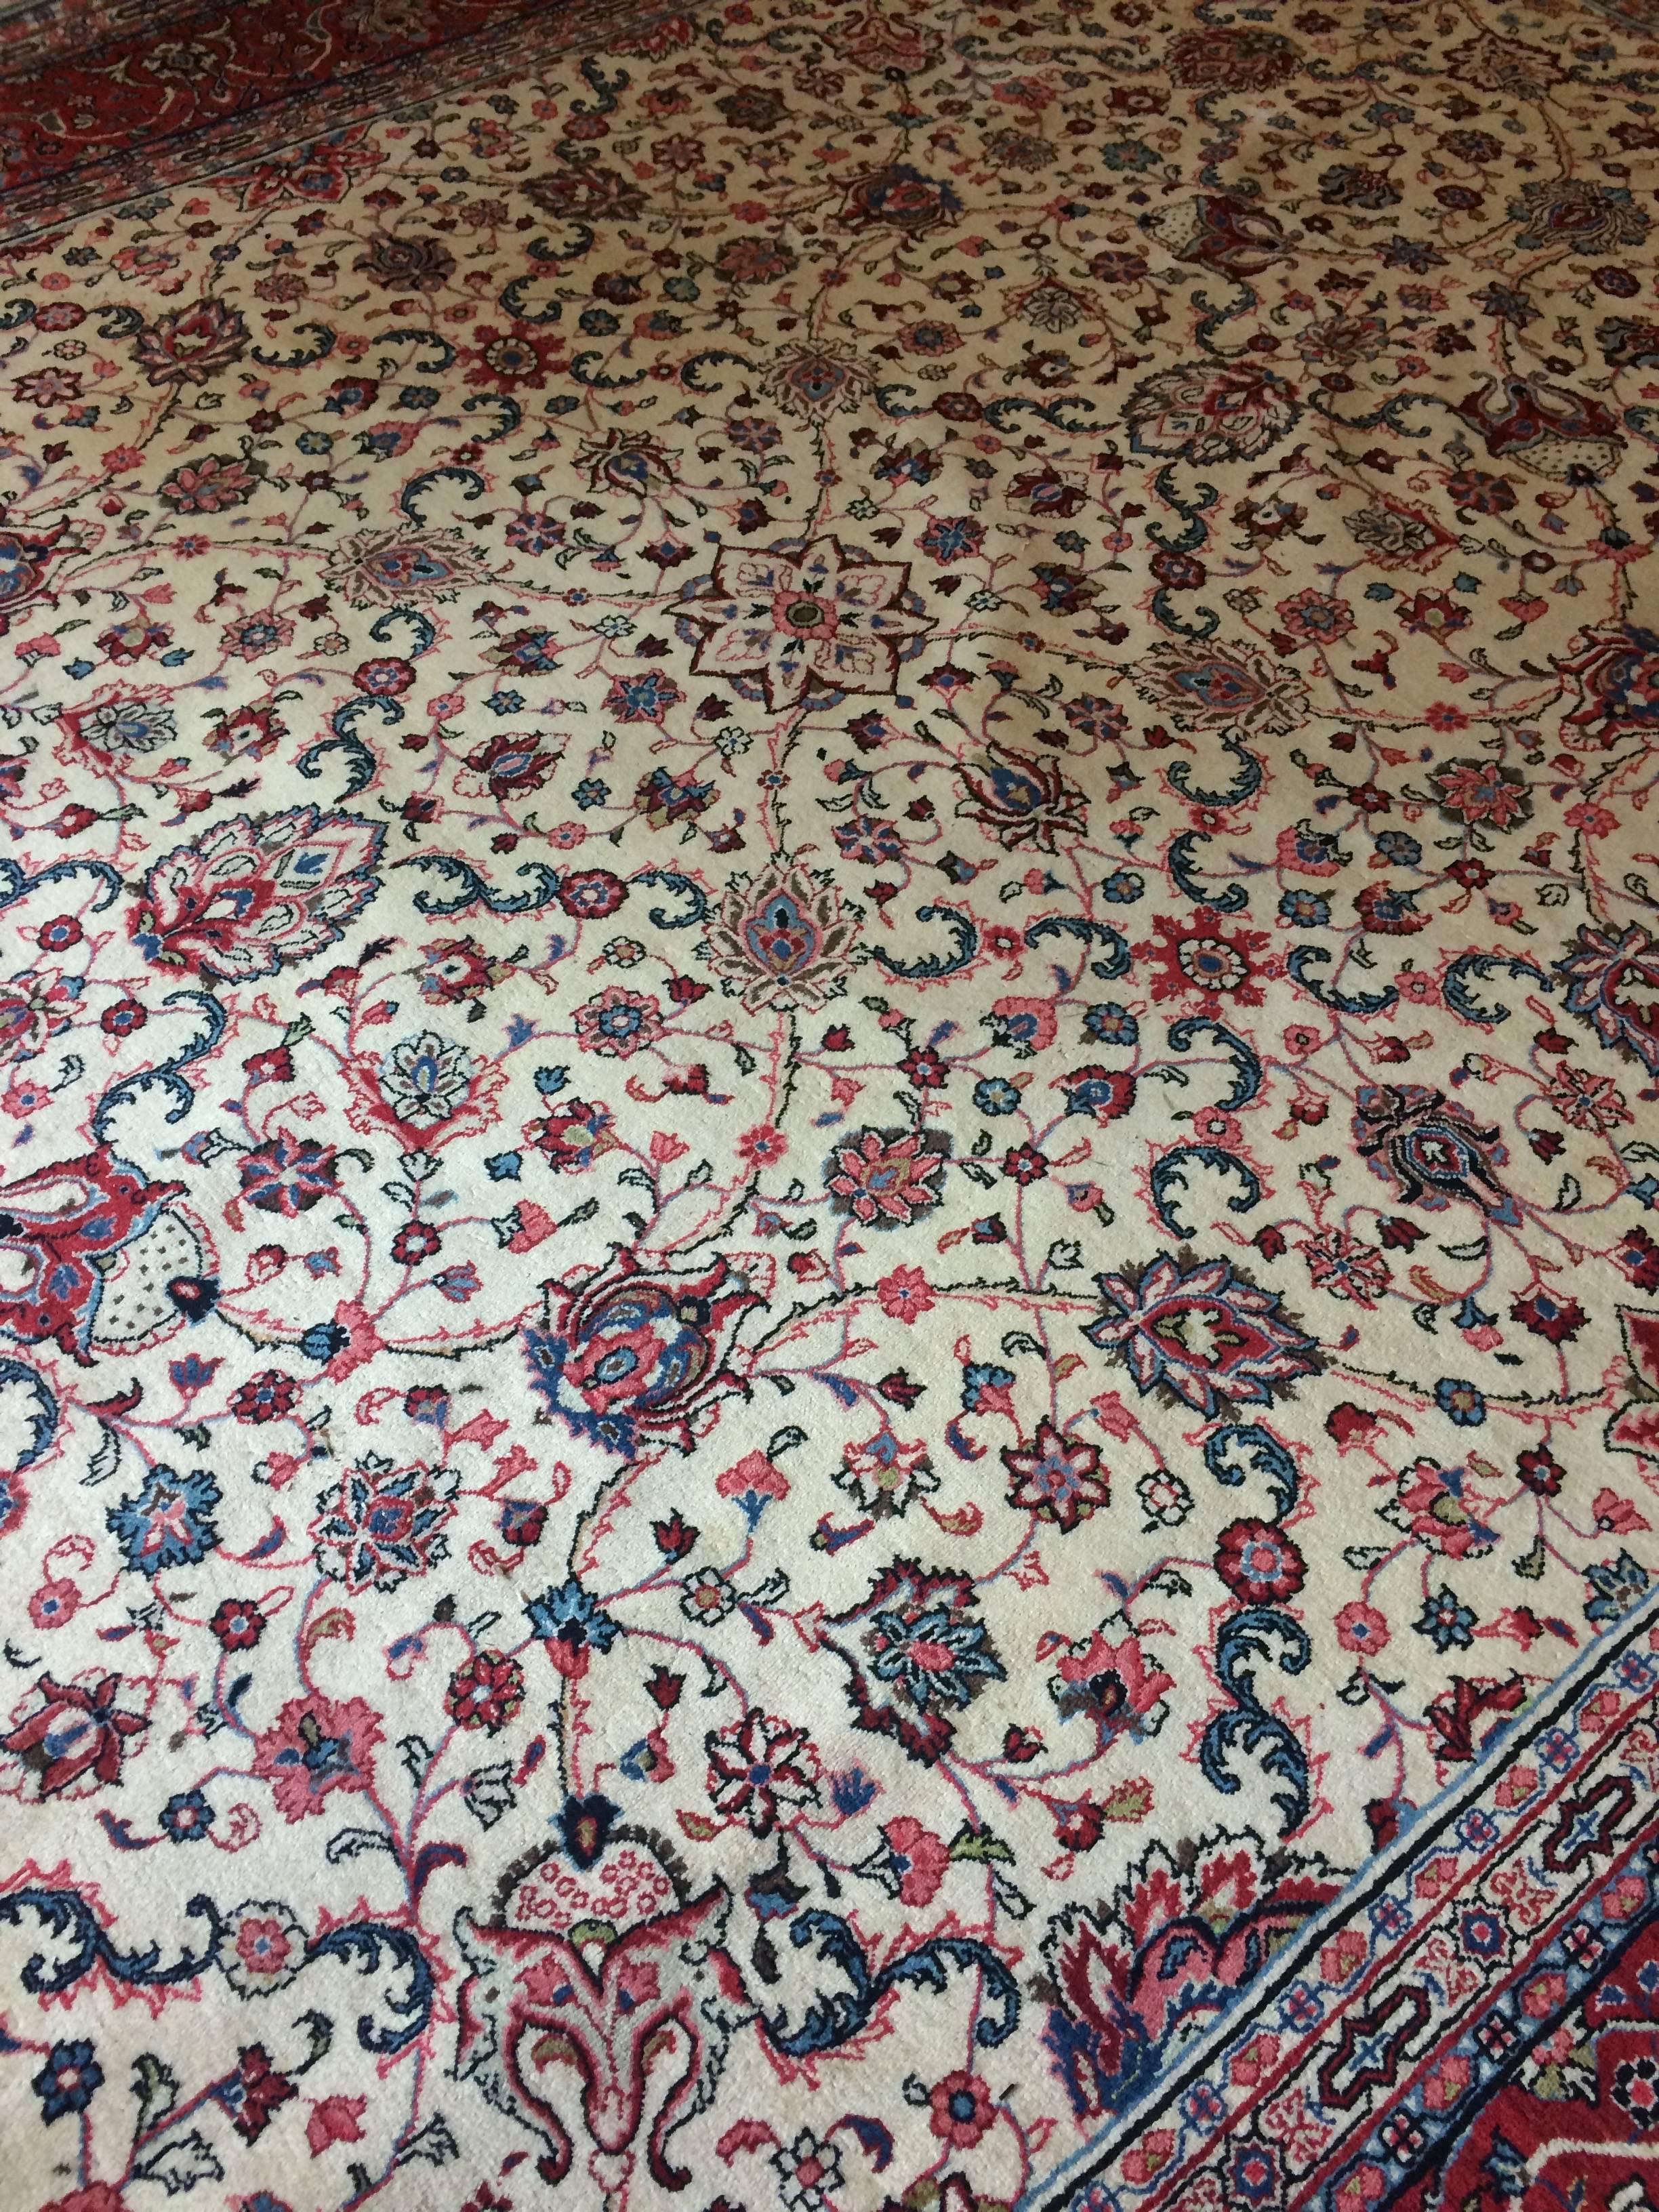 Sumptuous Large Isfahan Pakistani Rug in Jewel Tones 2